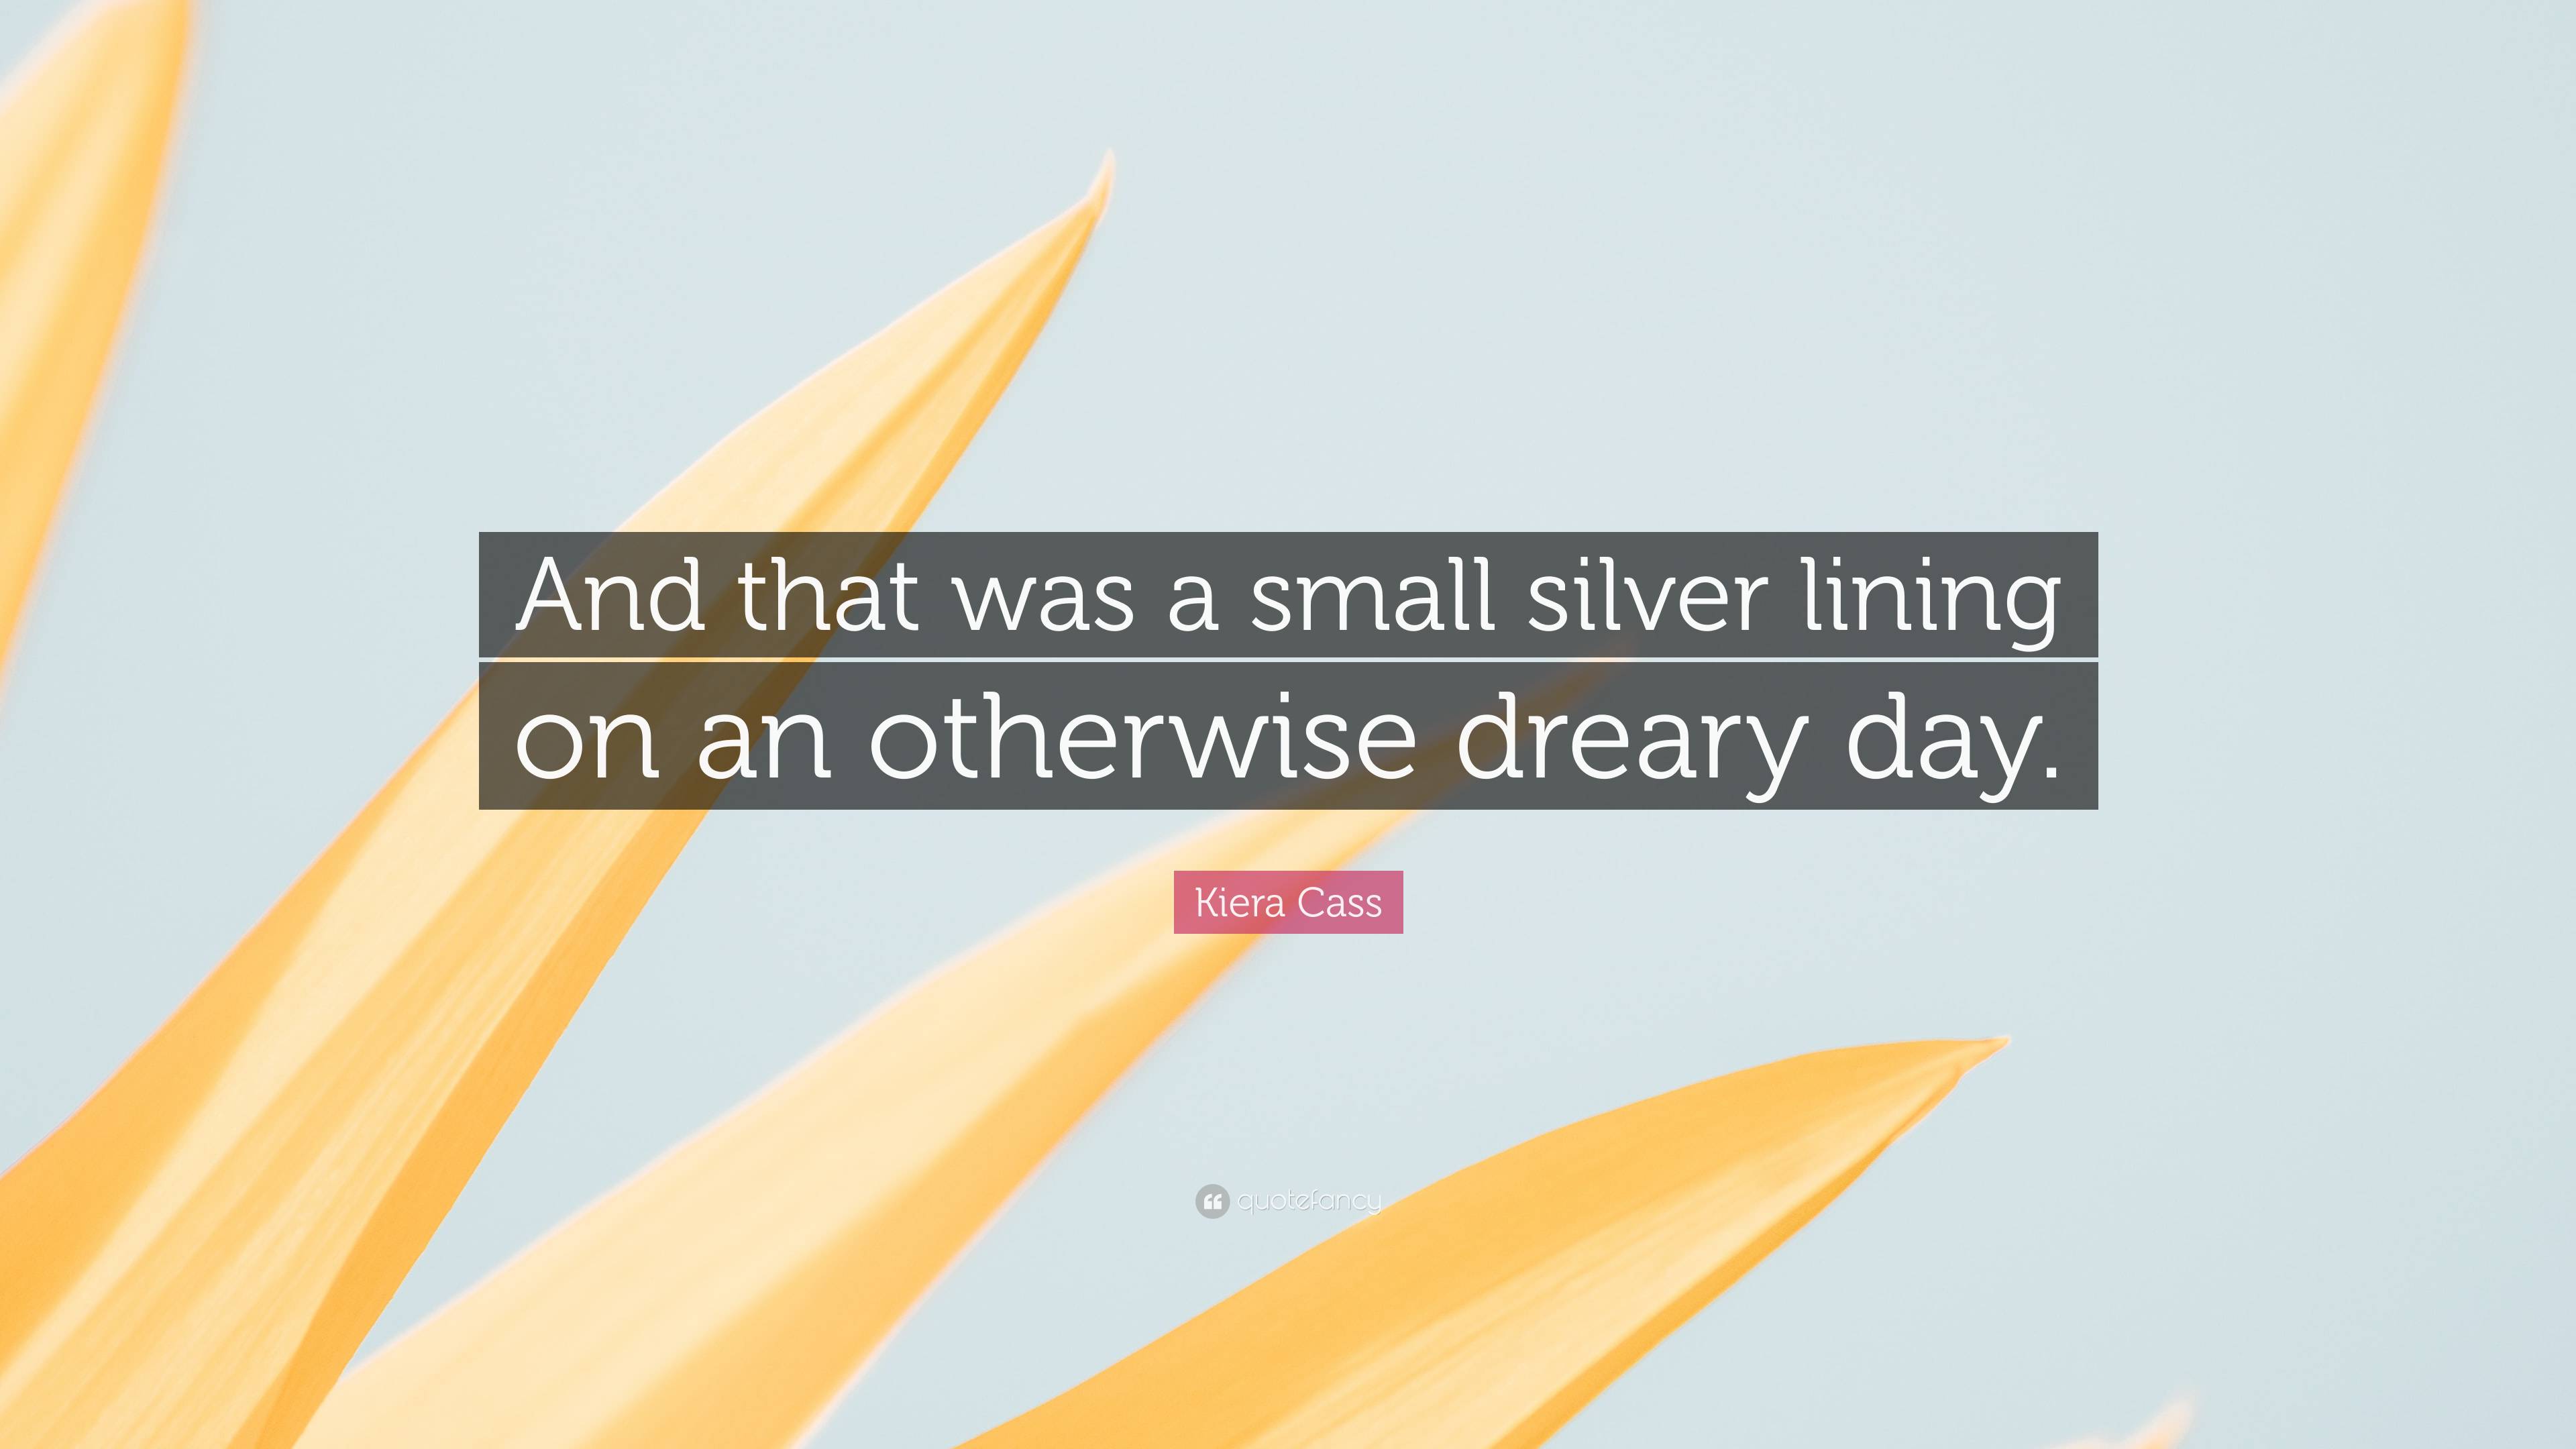 Word of the Day (silver lining)-14APR20 - Editorial Words